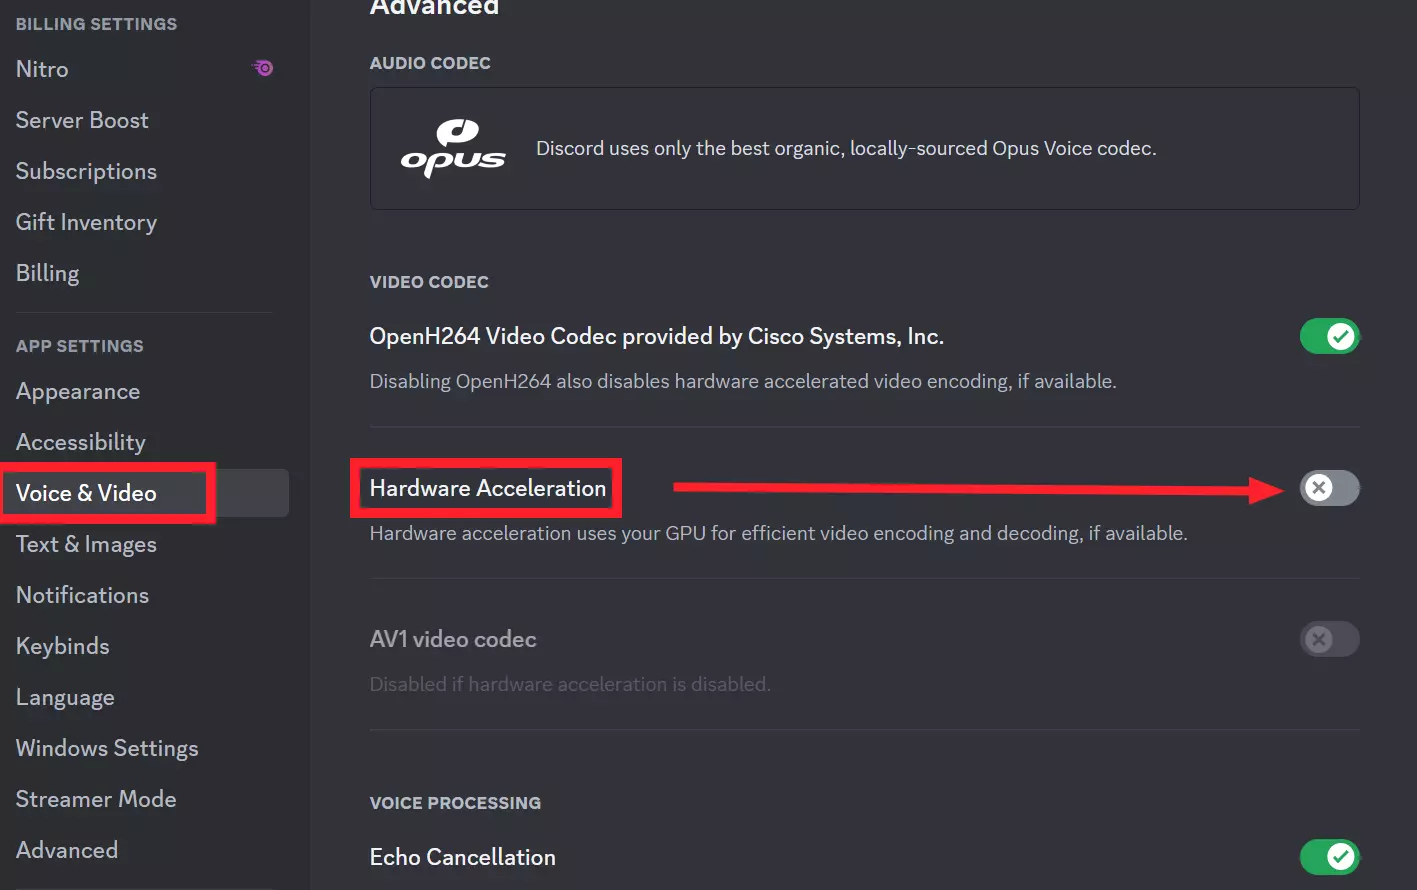 Disable "Hardware Acceleration" feature in Discord app